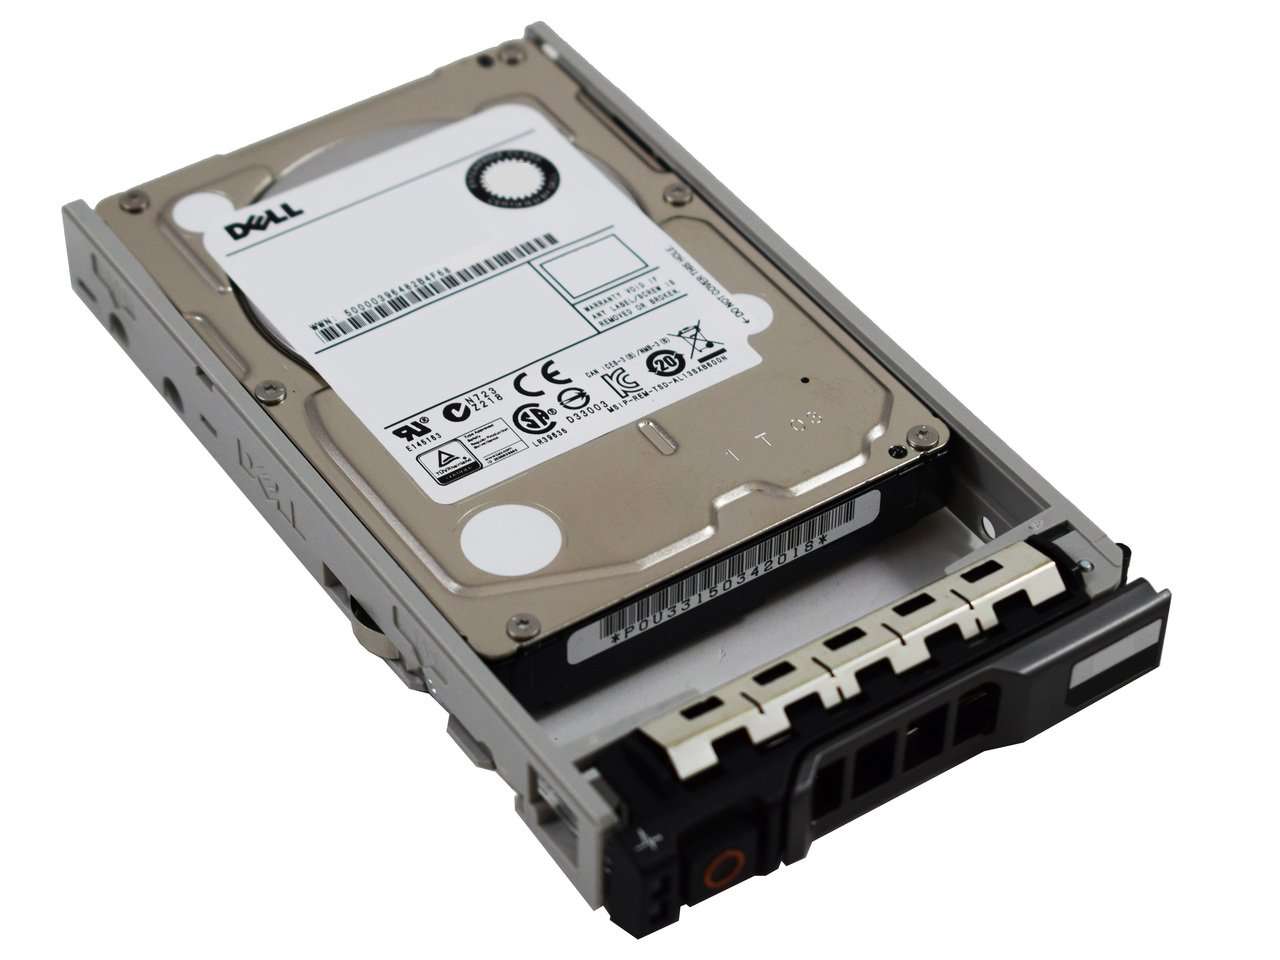 Dell G13 342-4178 600GB 10K RPM SAS 6Gb/s 512n 2.5" Manufacturer Recertified HDD